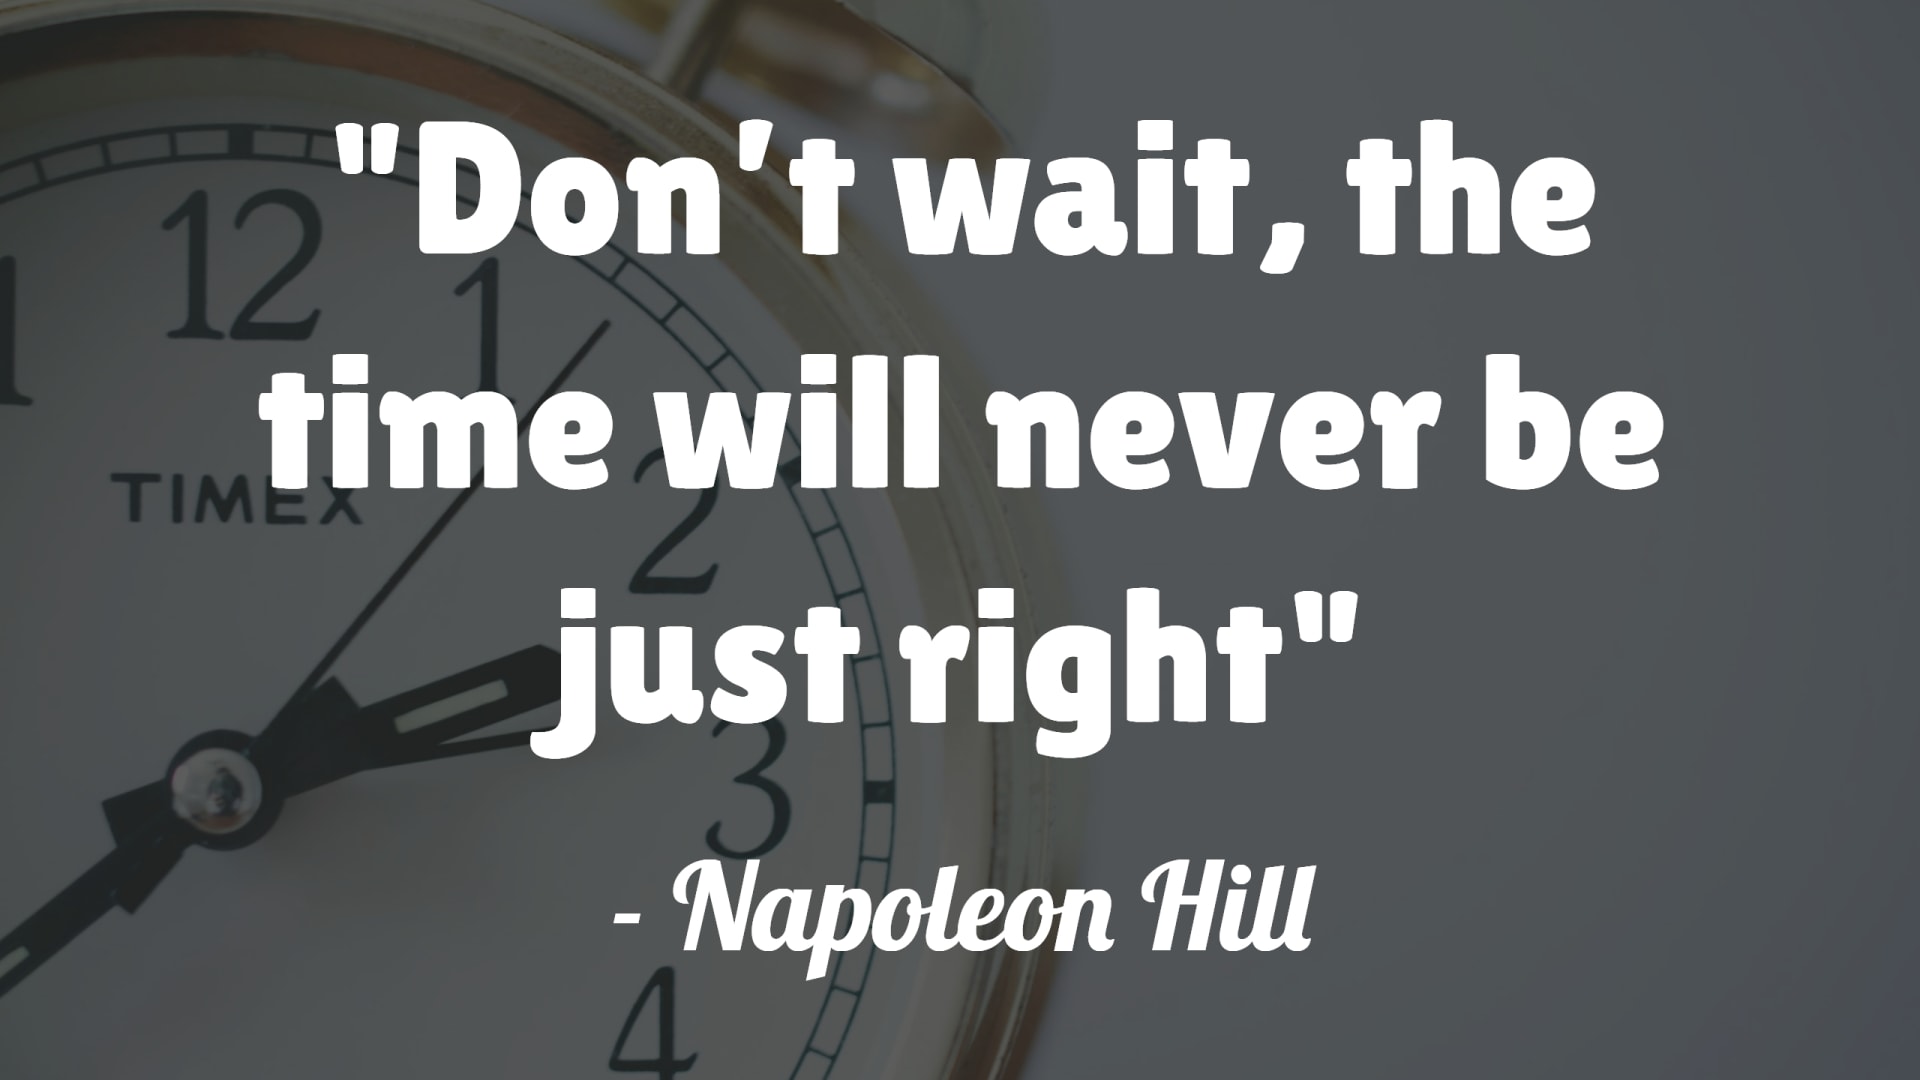 Don’t wait, the time will never be just right- Napoleon Hill